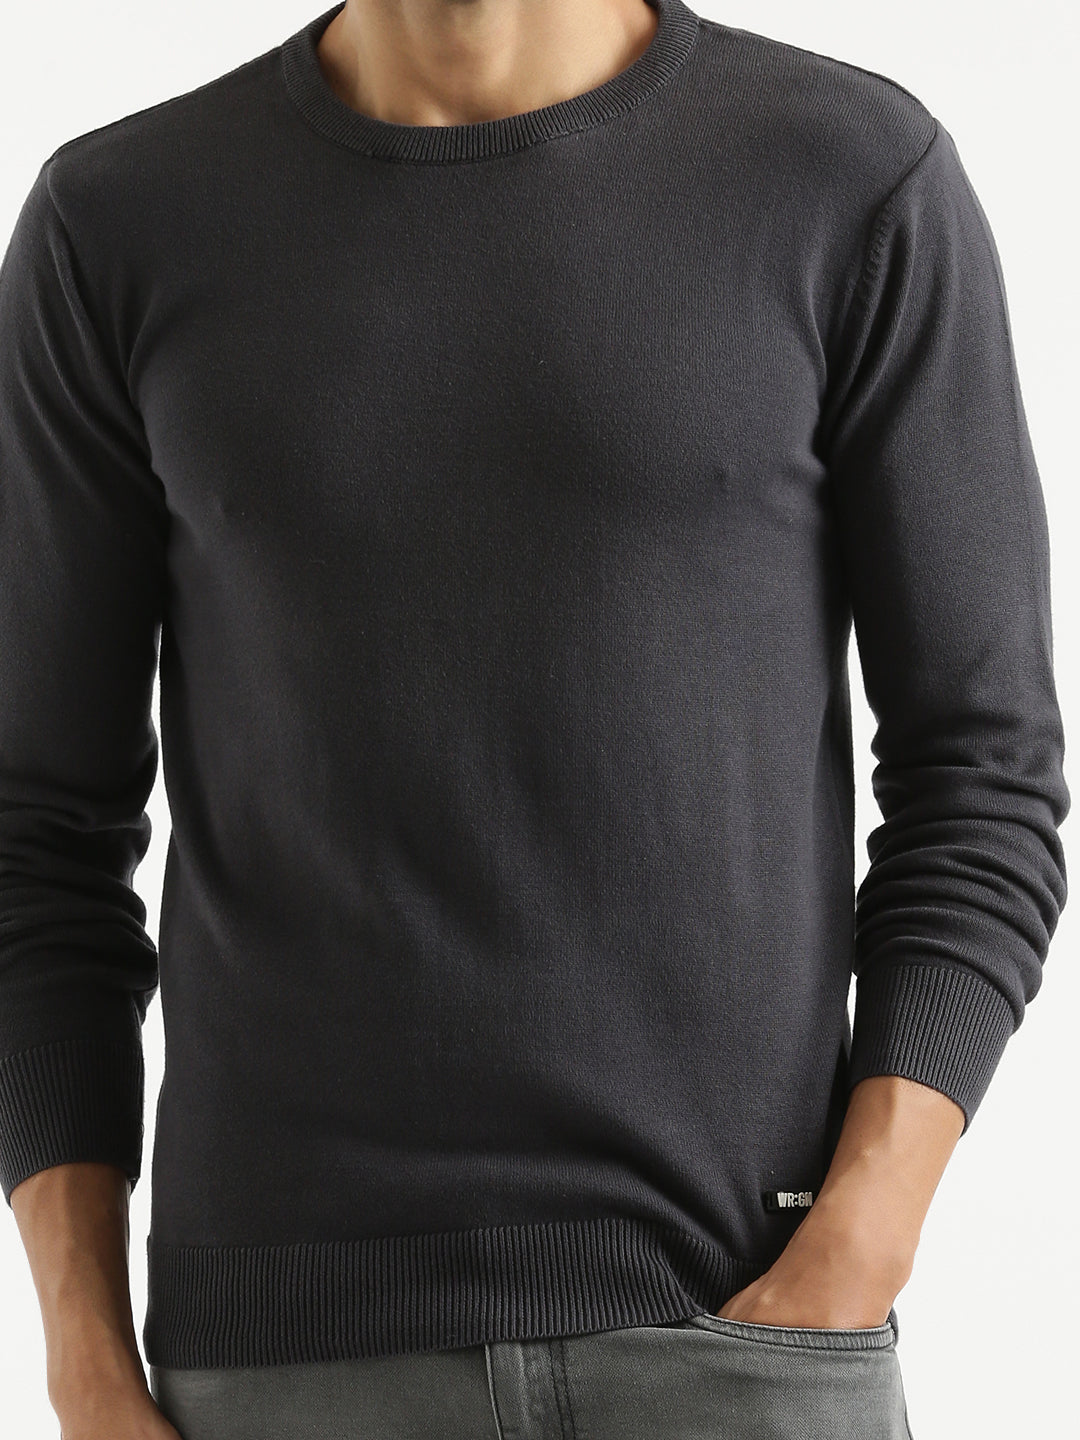 Classic Solid Grey Comfort Sweater